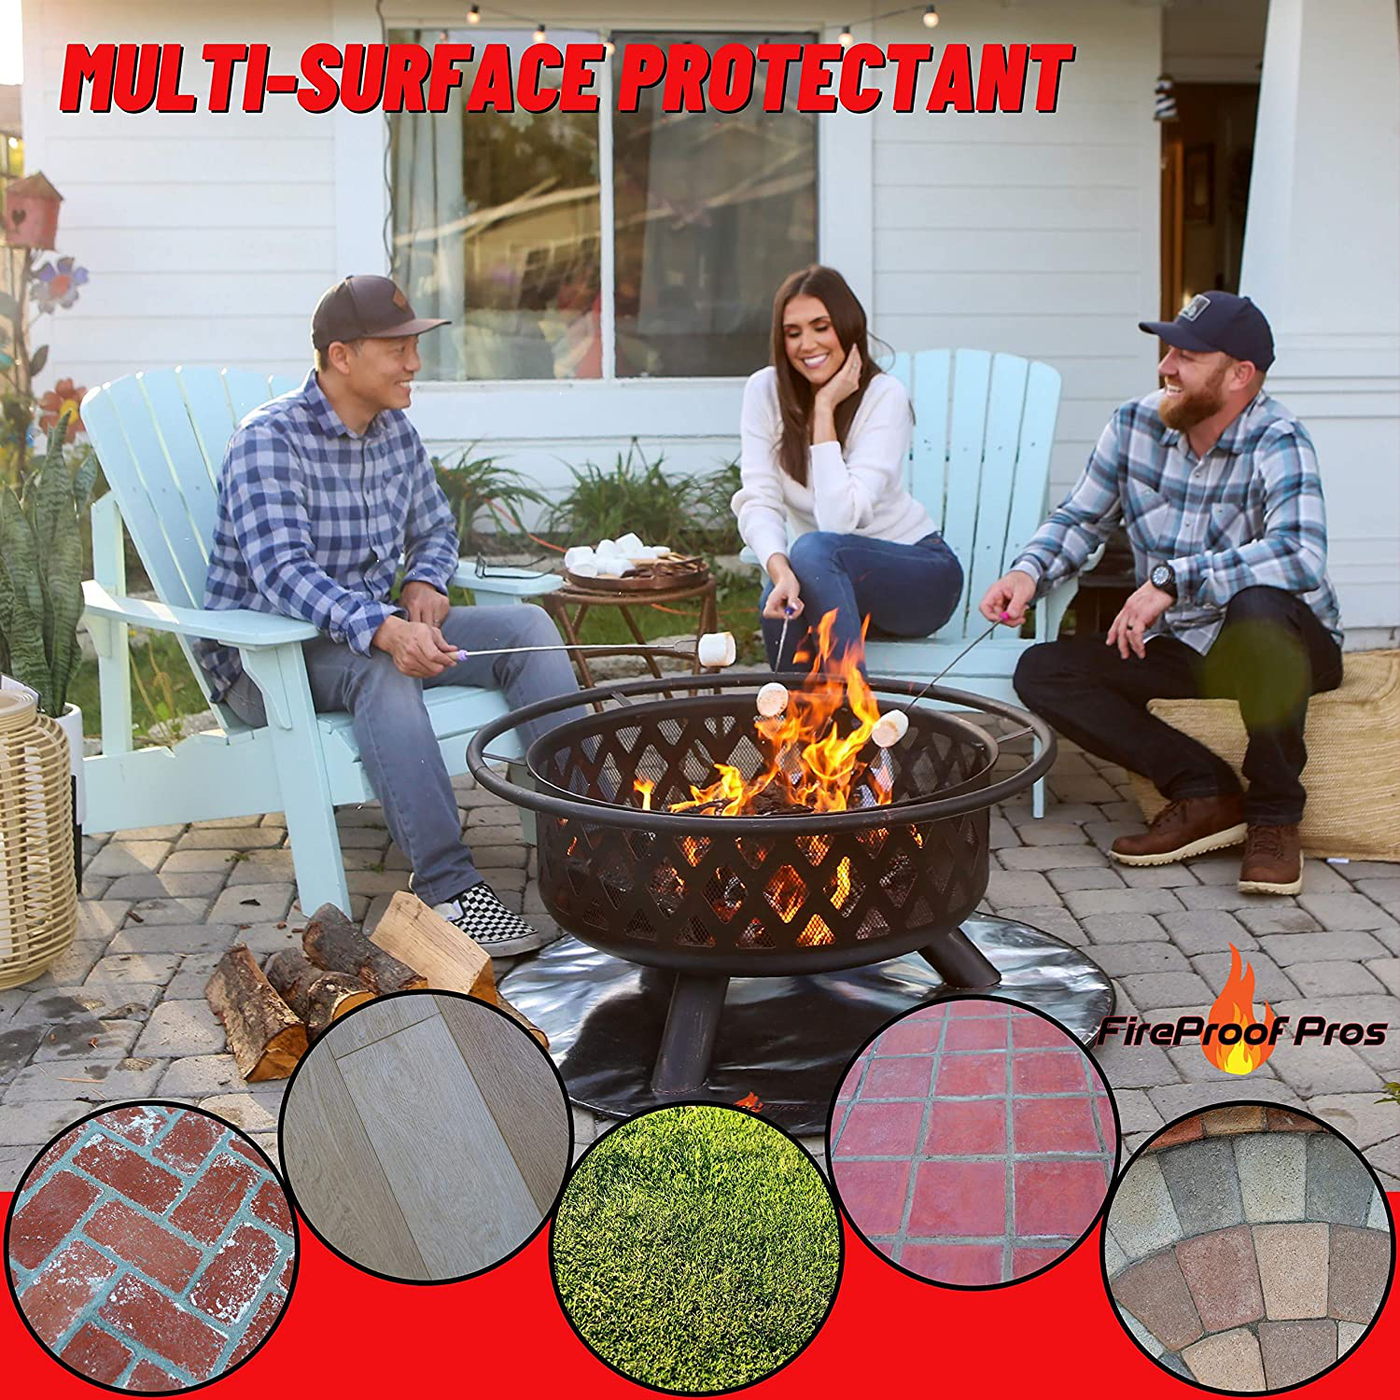 Fireproof Pros 36" Fire Pit Mat for Deck, Patio, Grass and Concrete. Heat Resistant Fireproof Mat / Ember Mat. Triple Layer Fire Pit Protective Pad, Thick Firepit Protector, BBQ Mat for Large Fire Pit